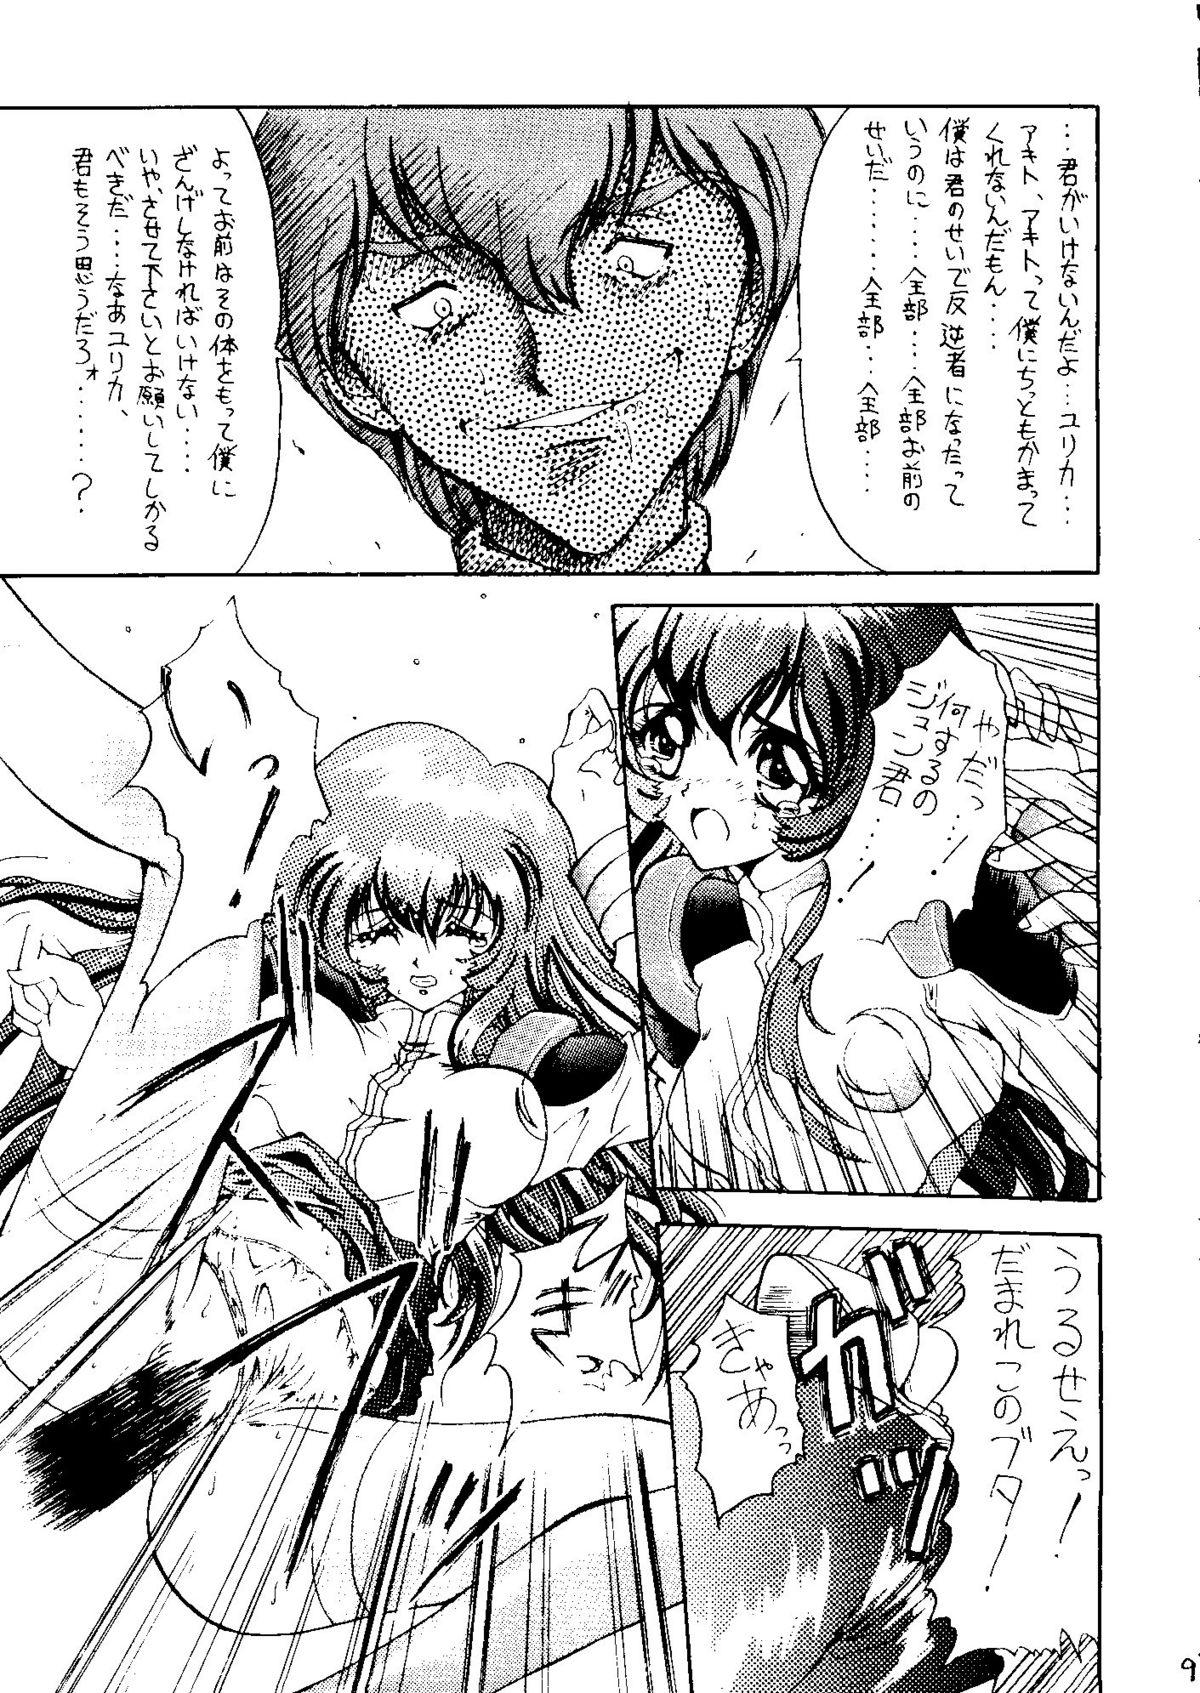 Dick AREX Special Version - Neon genesis evangelion Martian successor nadesico World masterpiece theater Remi nobodys girl Family Roleplay - Page 8